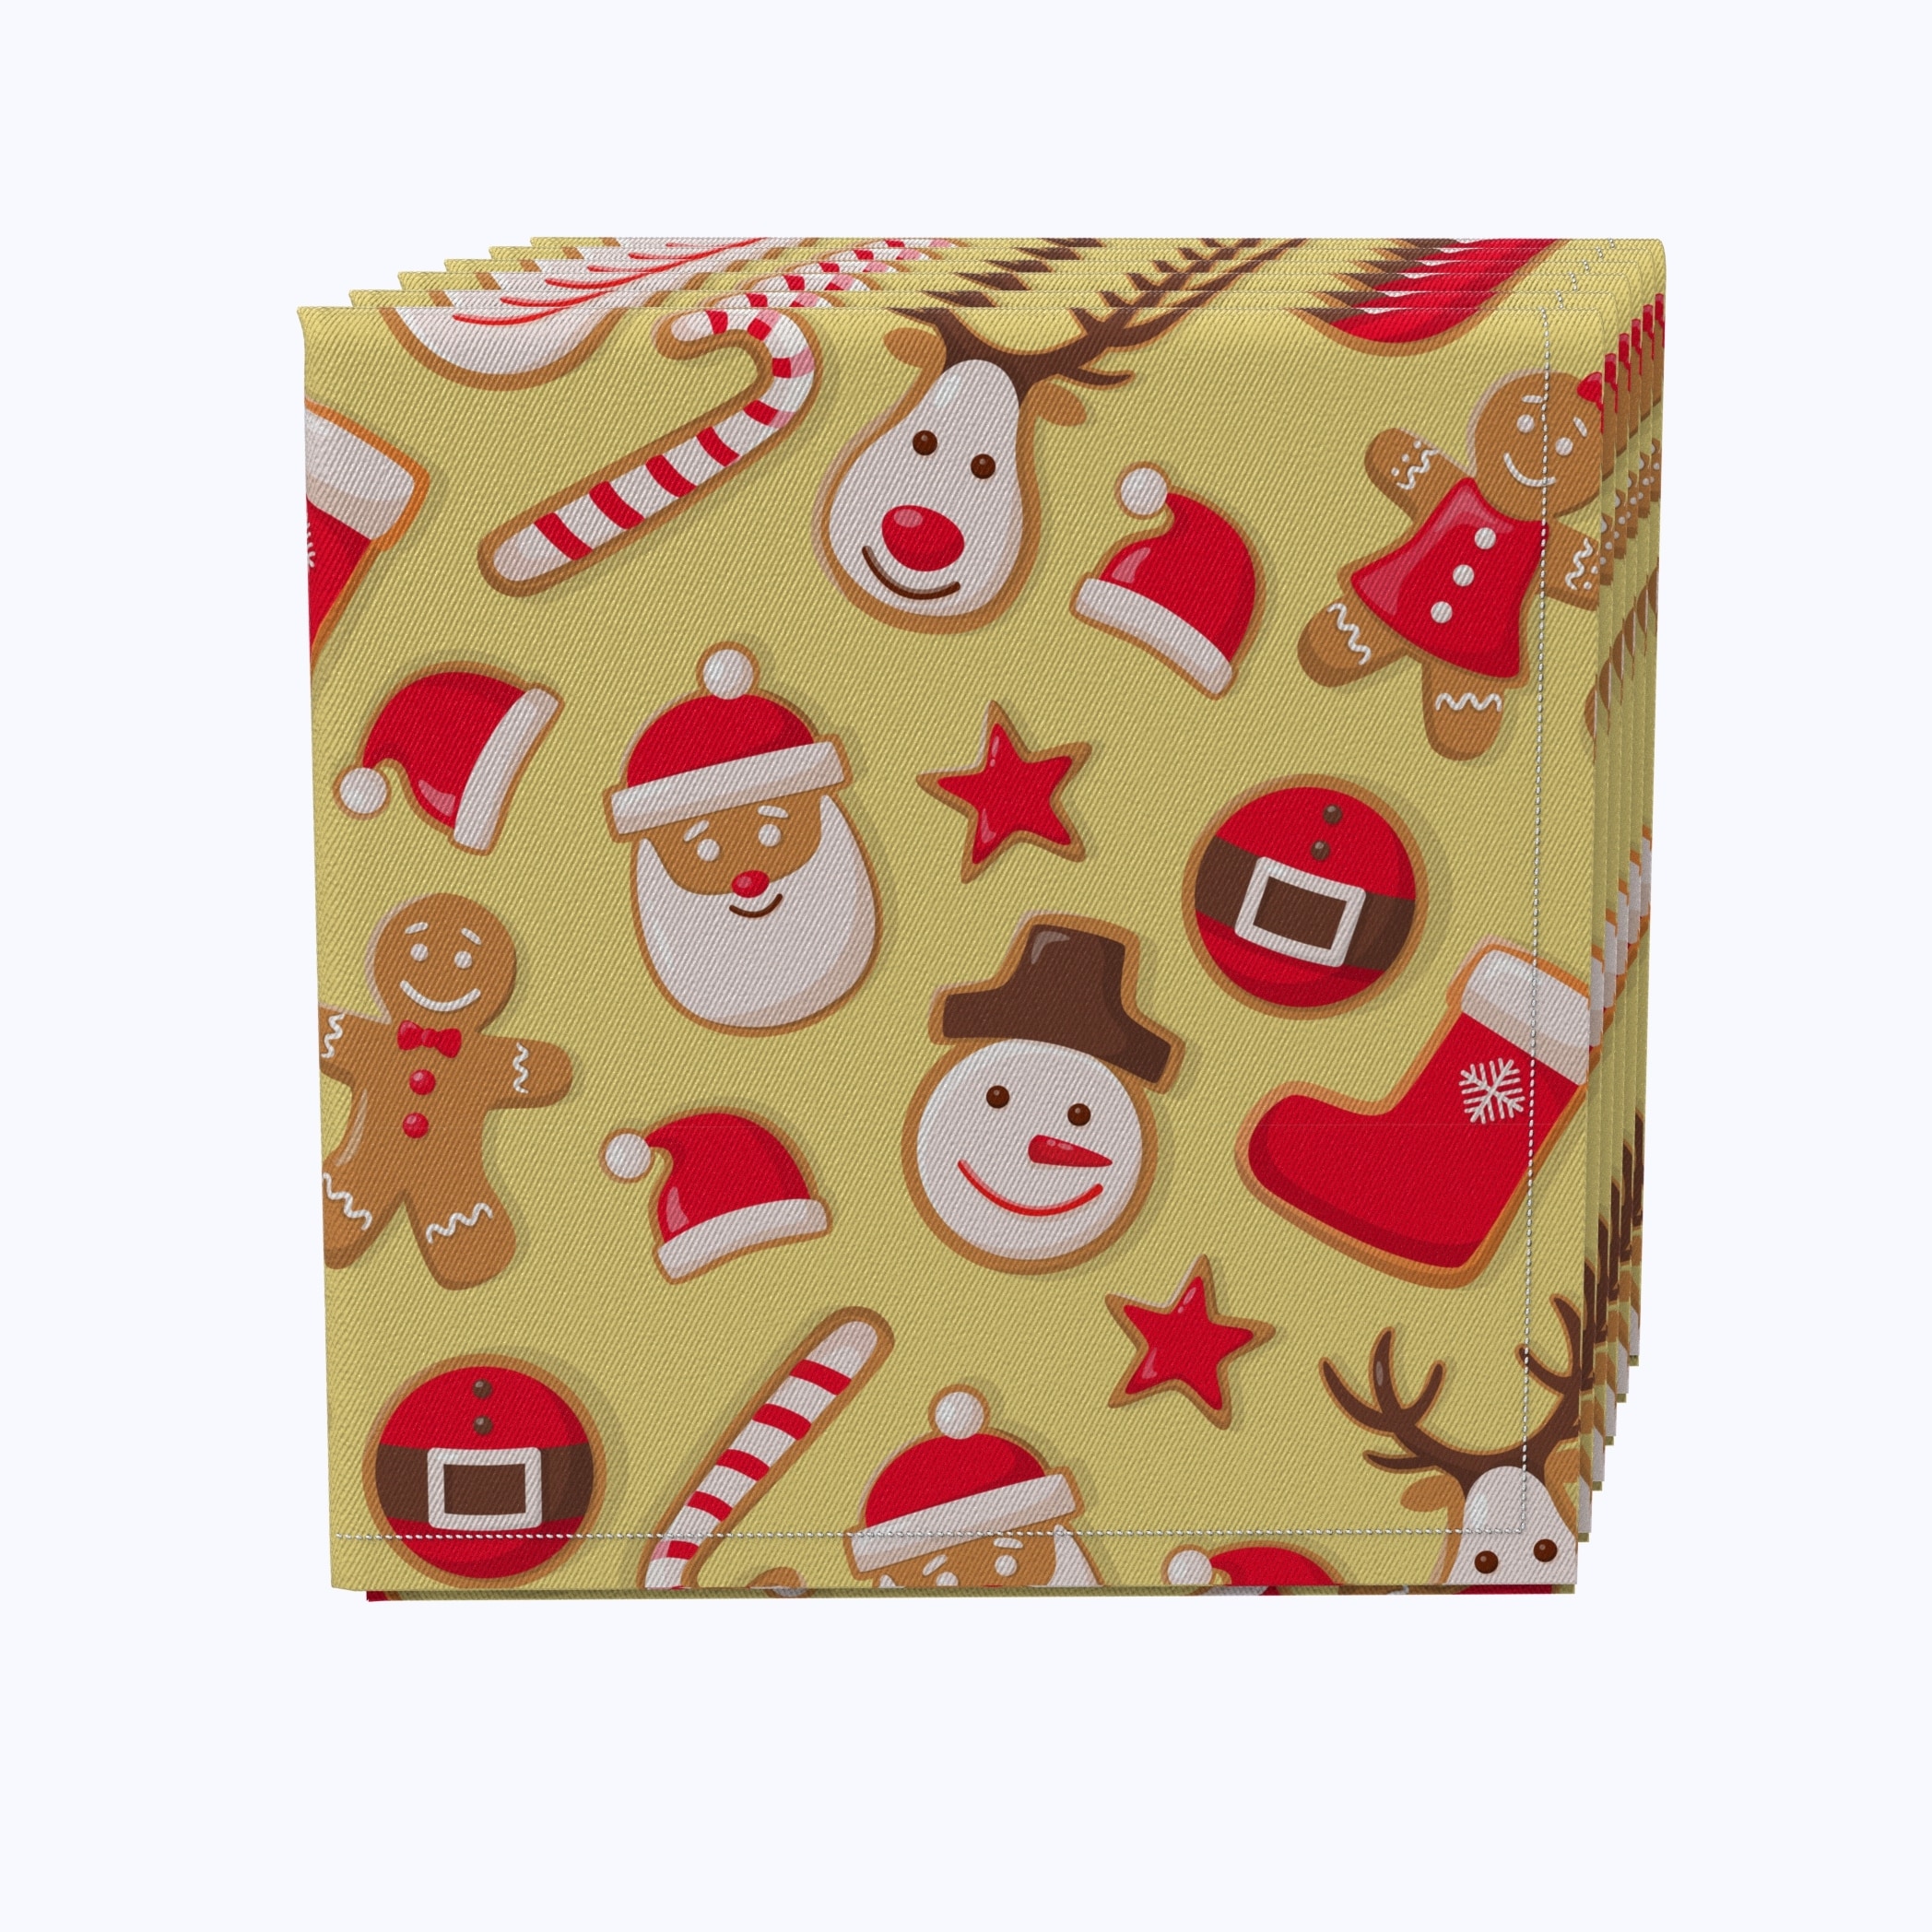 Fabric Textile Products, Inc. Napkin Set of 4, 100% Cotton, 20x20", Merry Holiday Cookies - 20 x 20